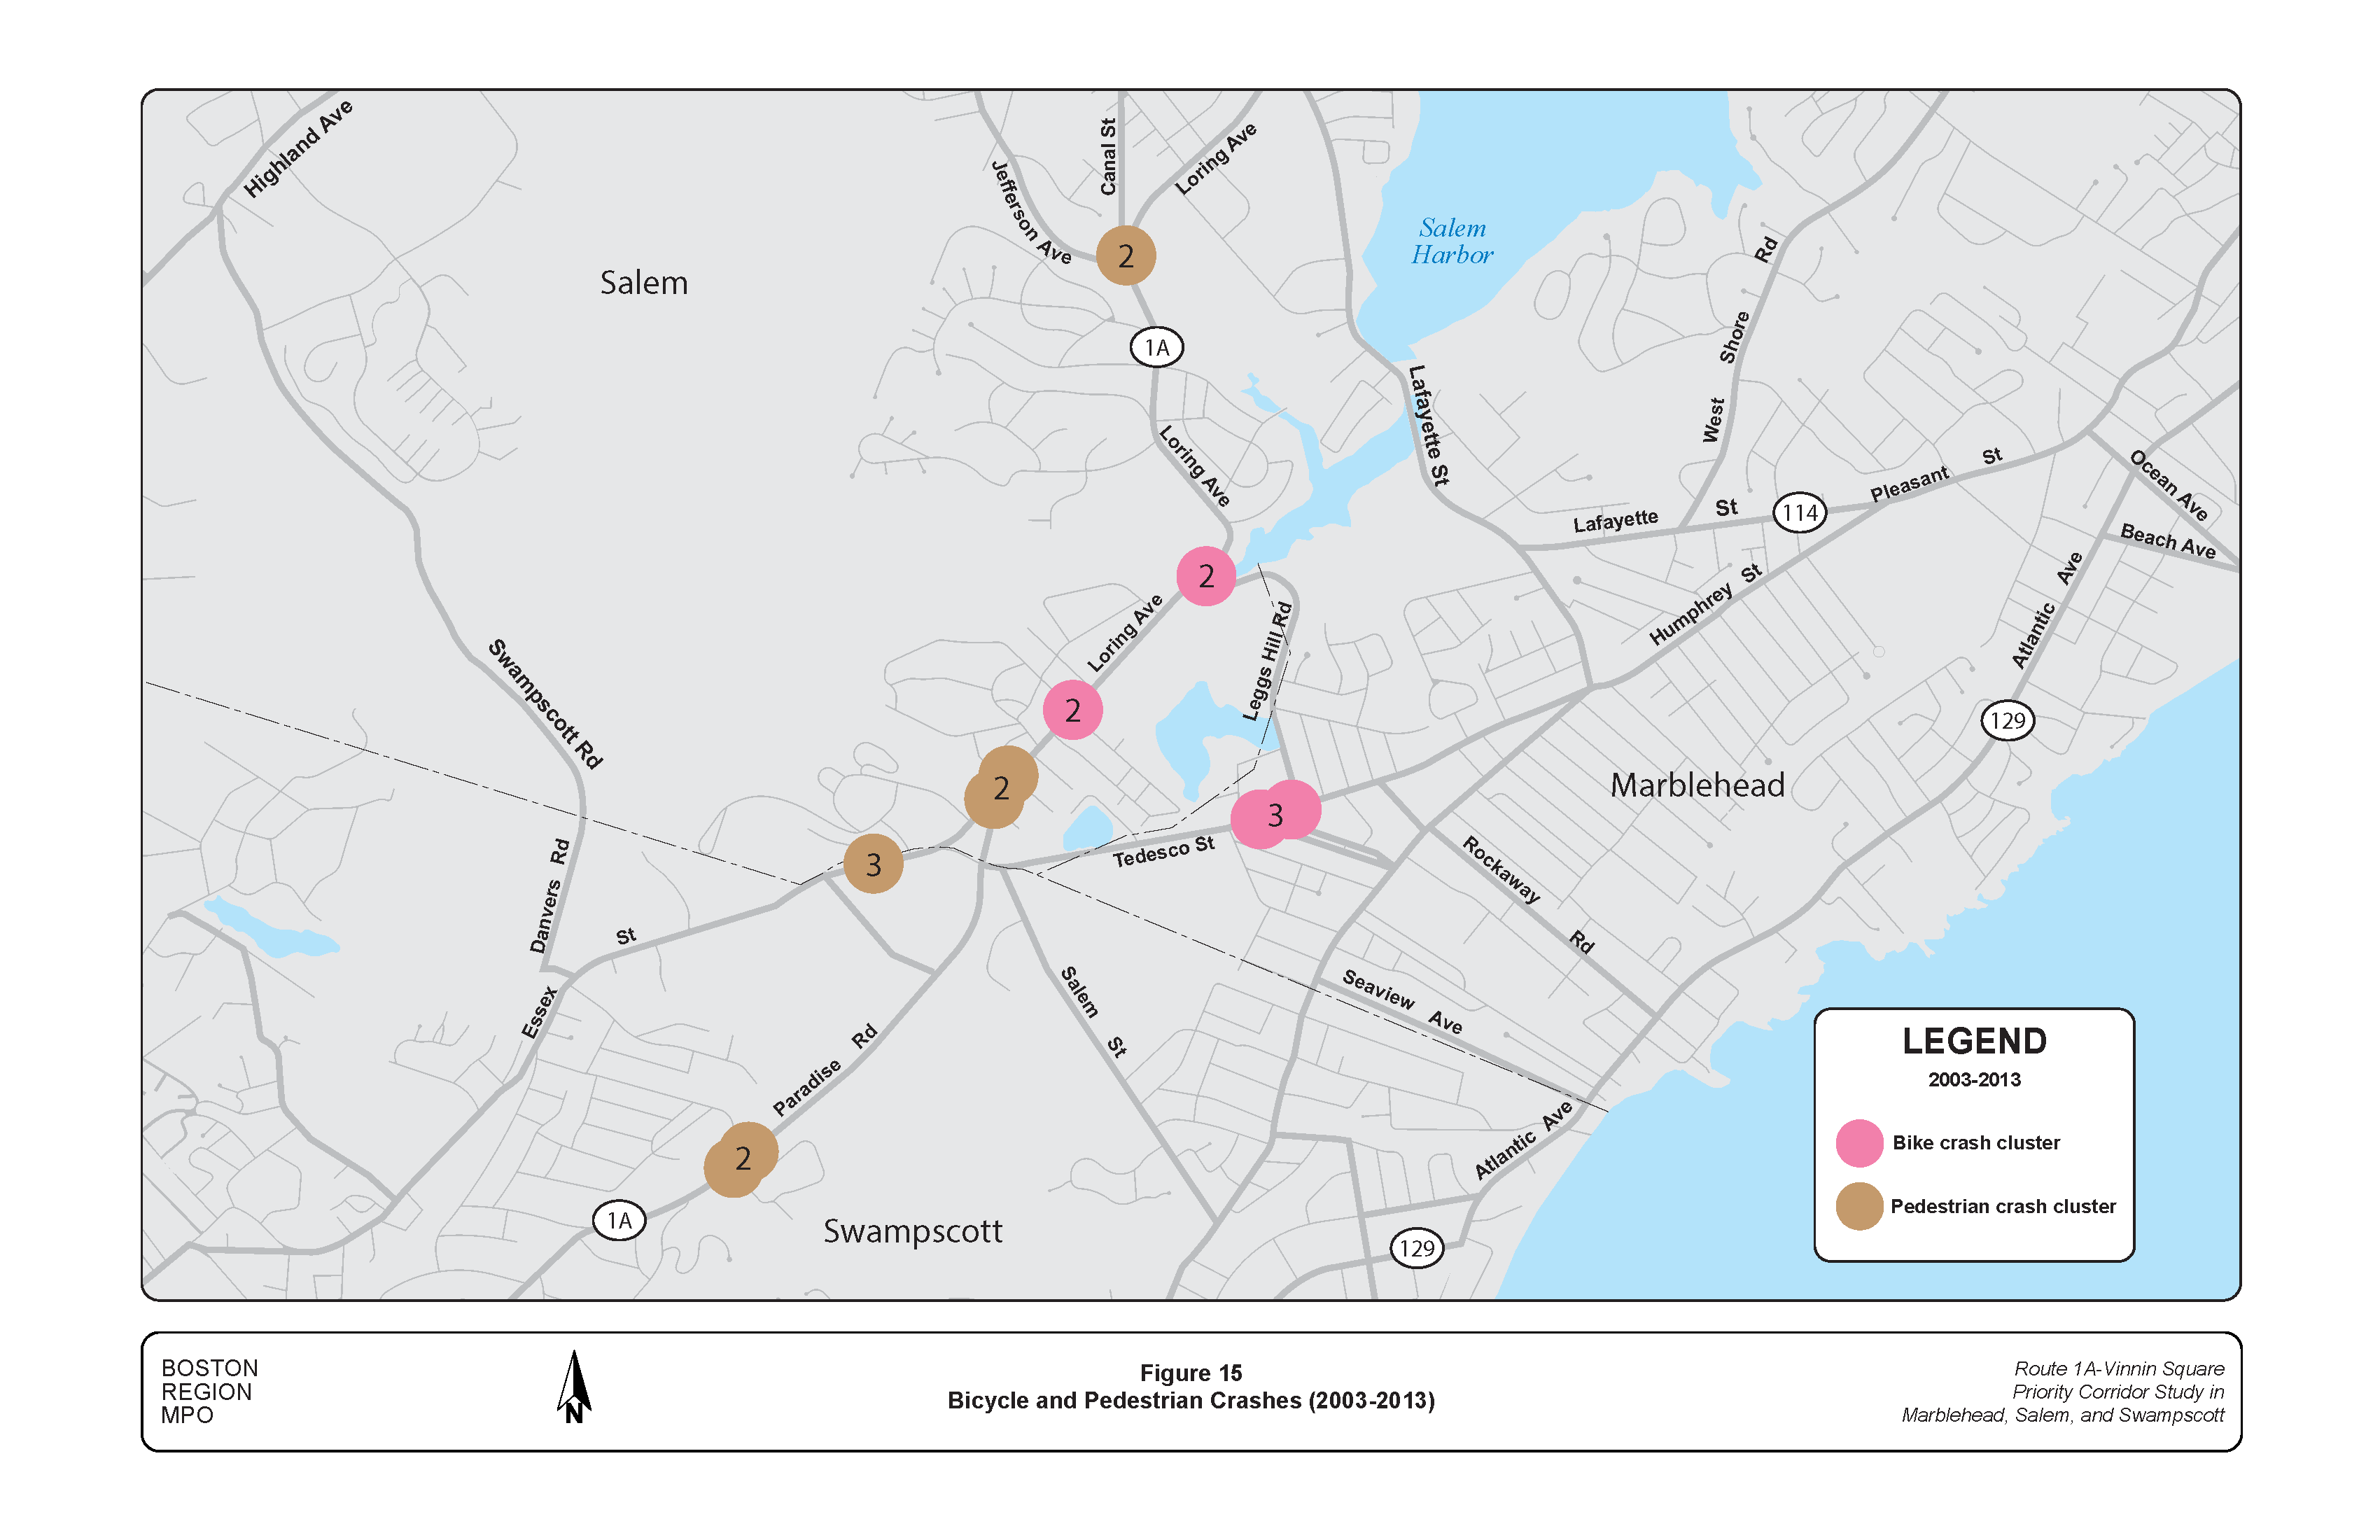 FIGURE 15. Bicycle and Pedestrian Crashes (2003-2013).Figure 15 is a map of the study area showing crashes involving bicyclists and pedestrians. The crashes occurred between 2003 and 2013.